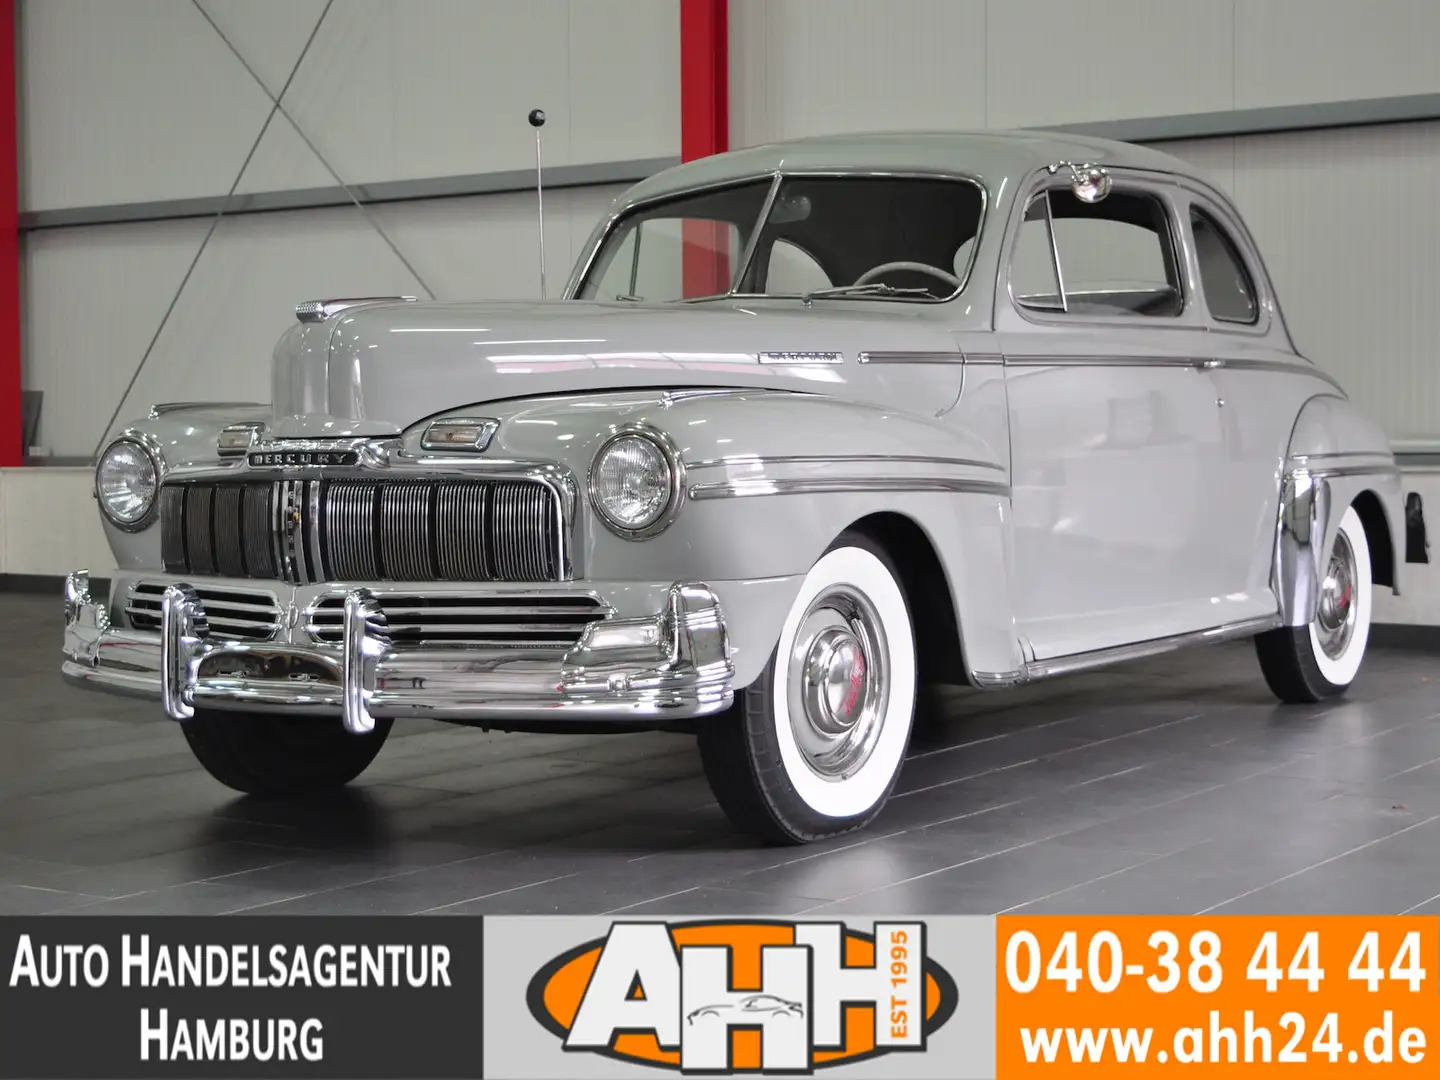 Ford Mercury EIGHT COUPE FLATHEAD V8 WEISSWAND|1H BRD siva - 1